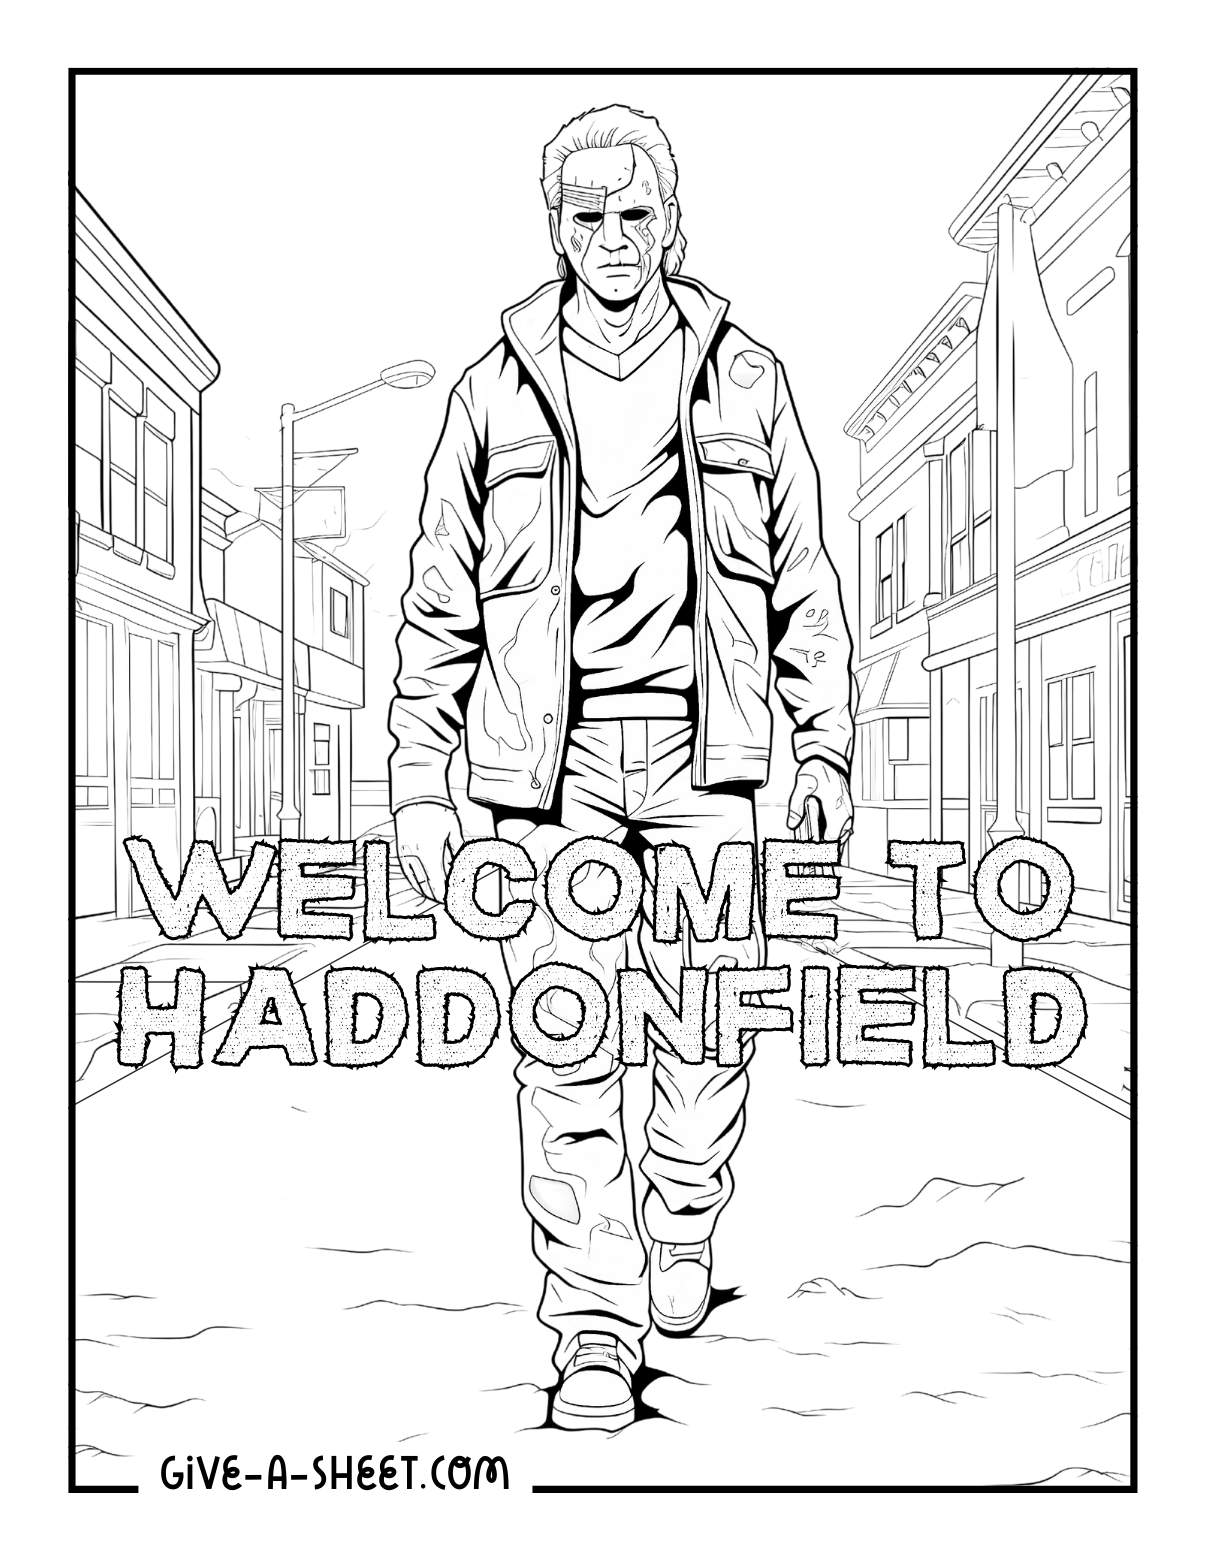 Michael Myers walking in Haddonfield on October 31 Halloween night coloring sheet for adults.